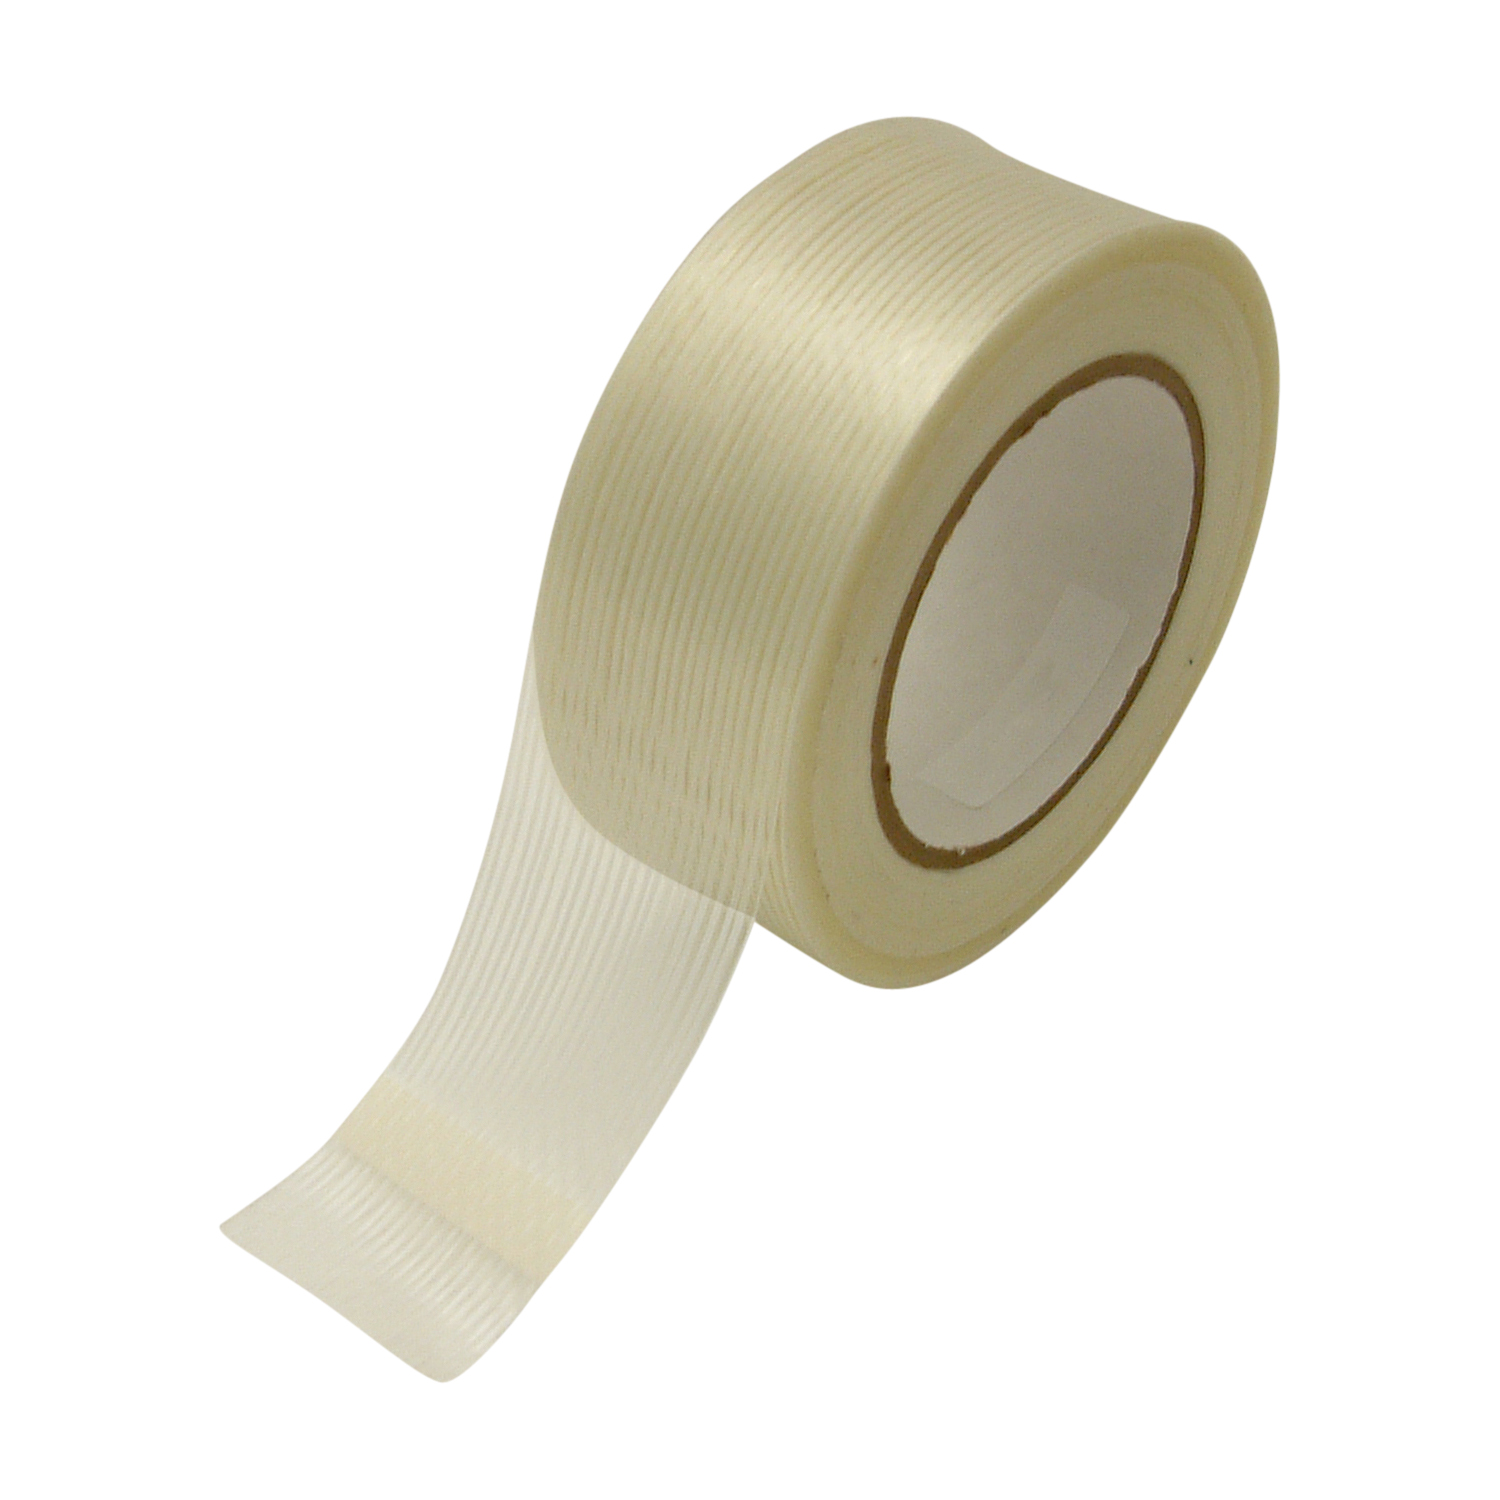 JVCC SFT-130 Mid-Grade Filament Strapping Tape